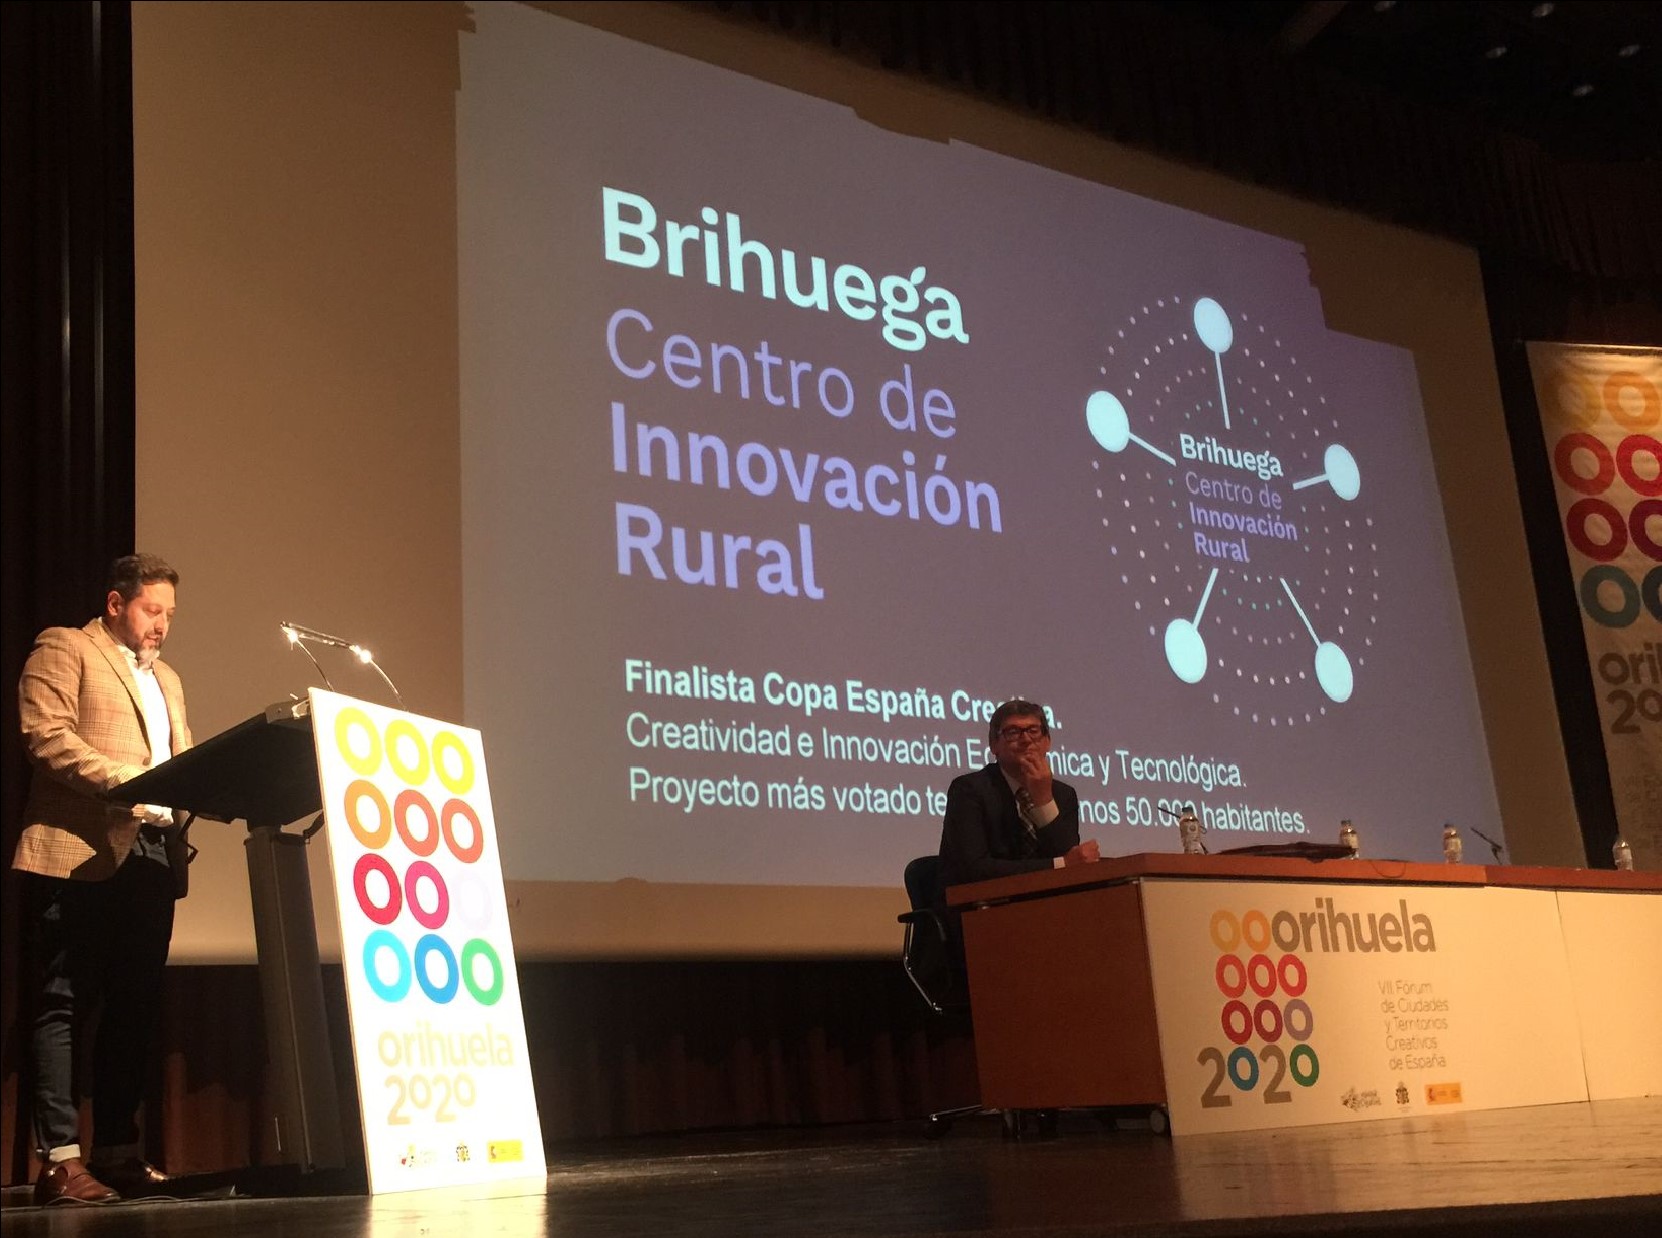 Rural Innovation Center: a solution to bring innovation processes and the dynamics of creative transformation closer to small municipalities.